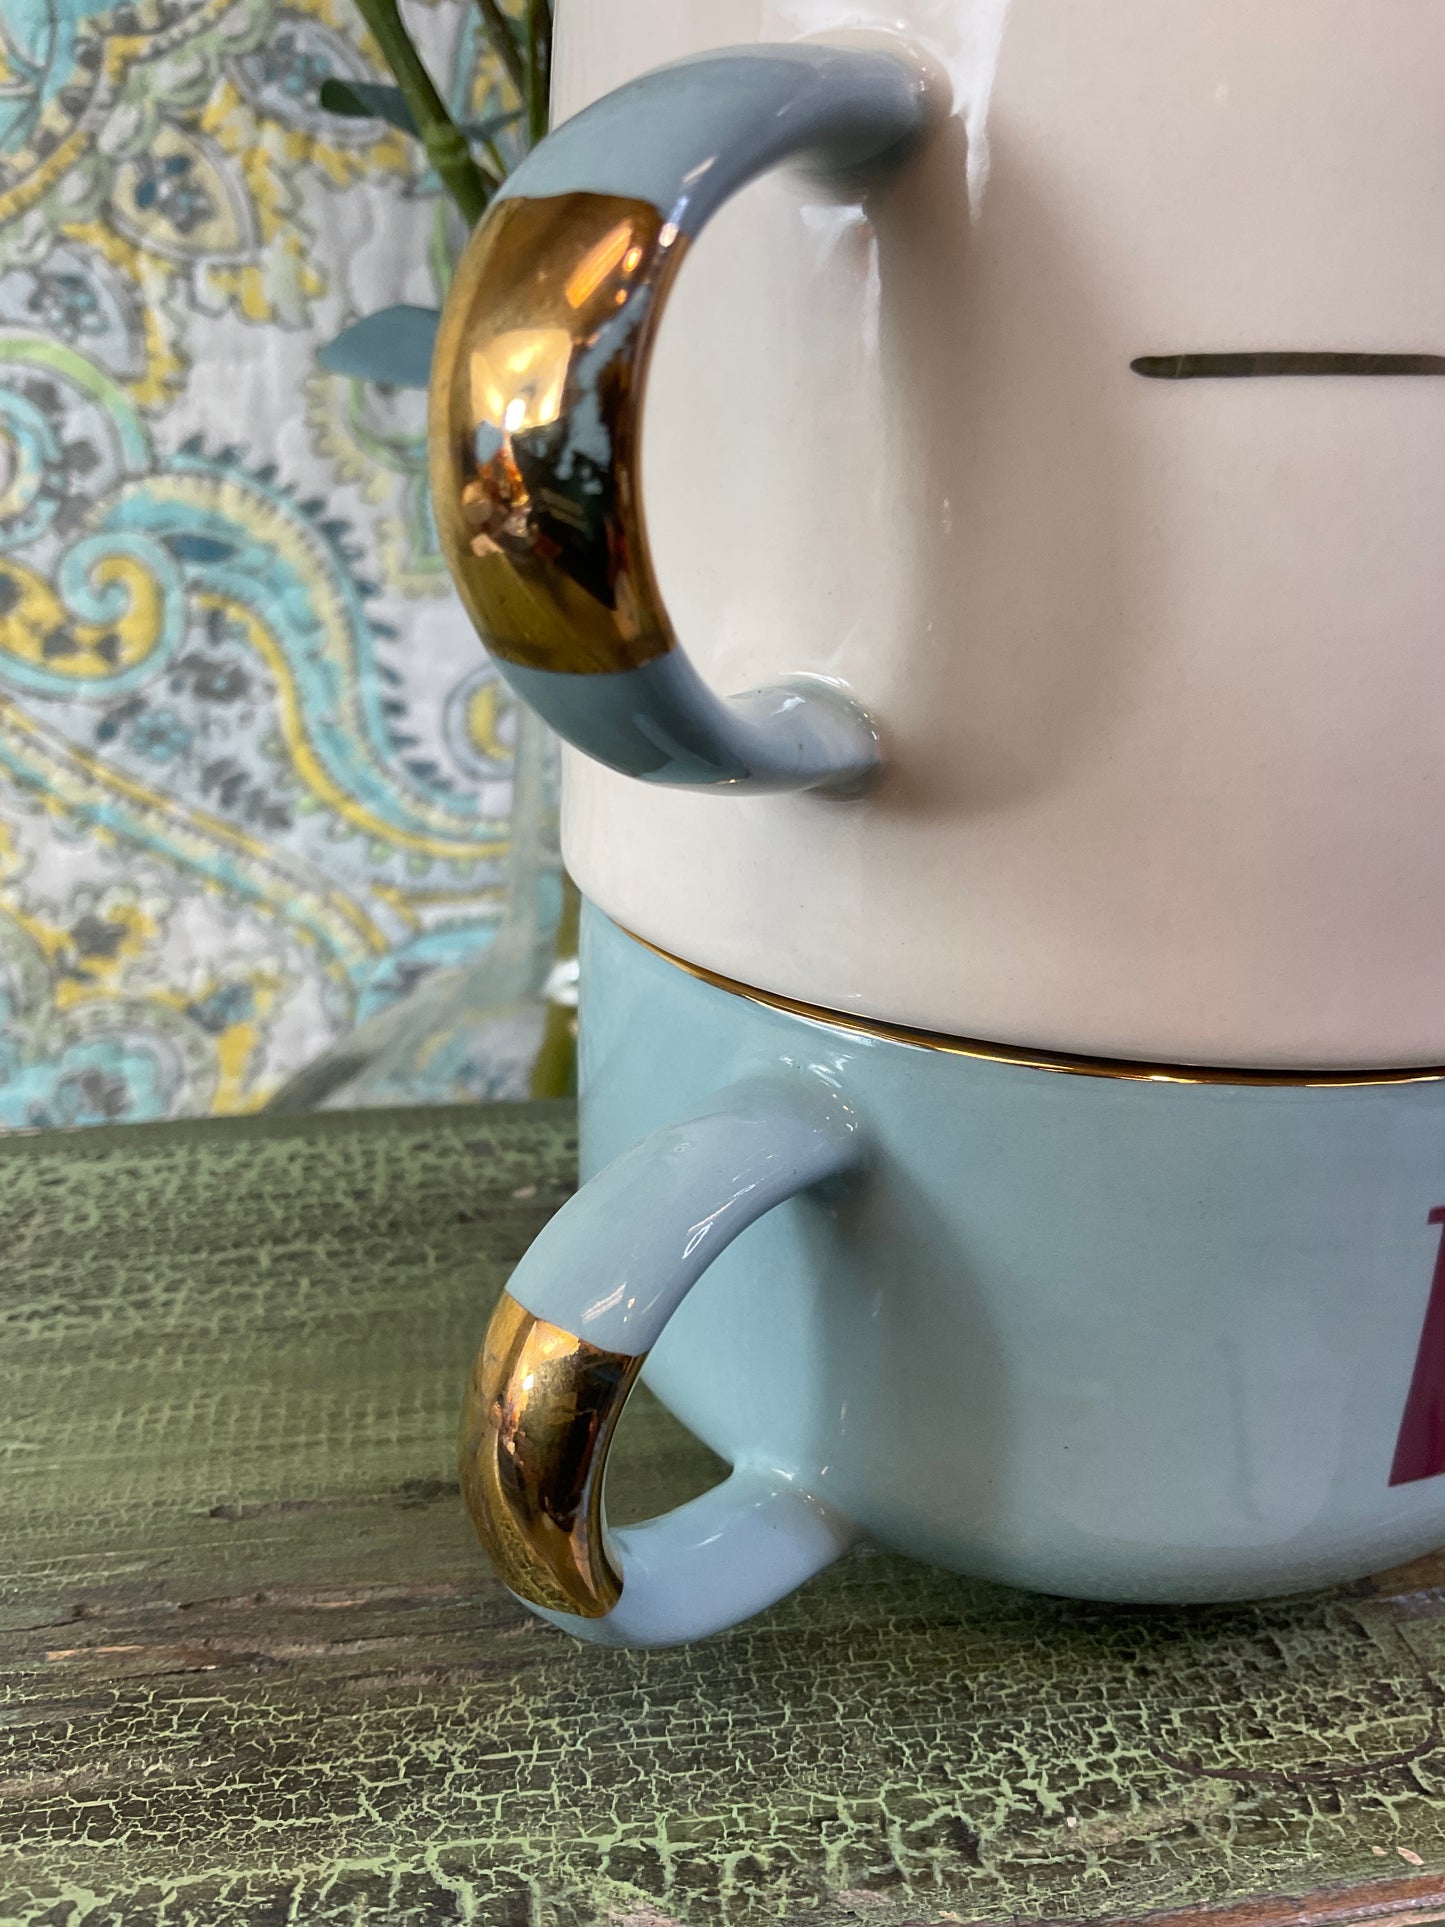 Anthropologie Tea For Me! Teapot With Cup